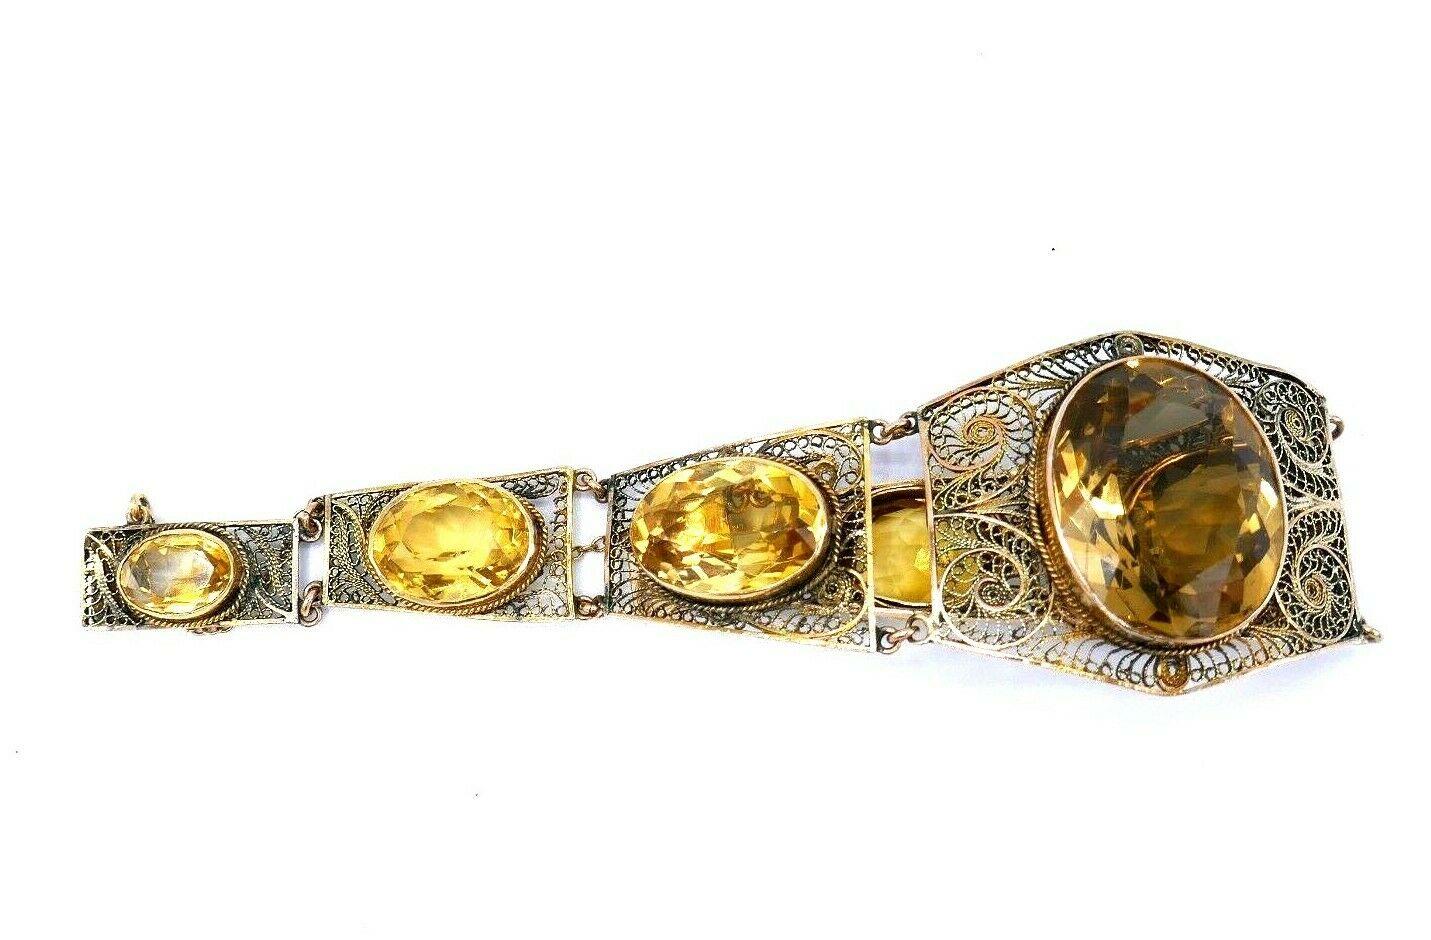 A gorgeous antique filigree bangle bracelet made of 14k yellow gold (stamped) featuring oval cut citrines. Comprises six links  connected by wire. 
Will fit up to 6